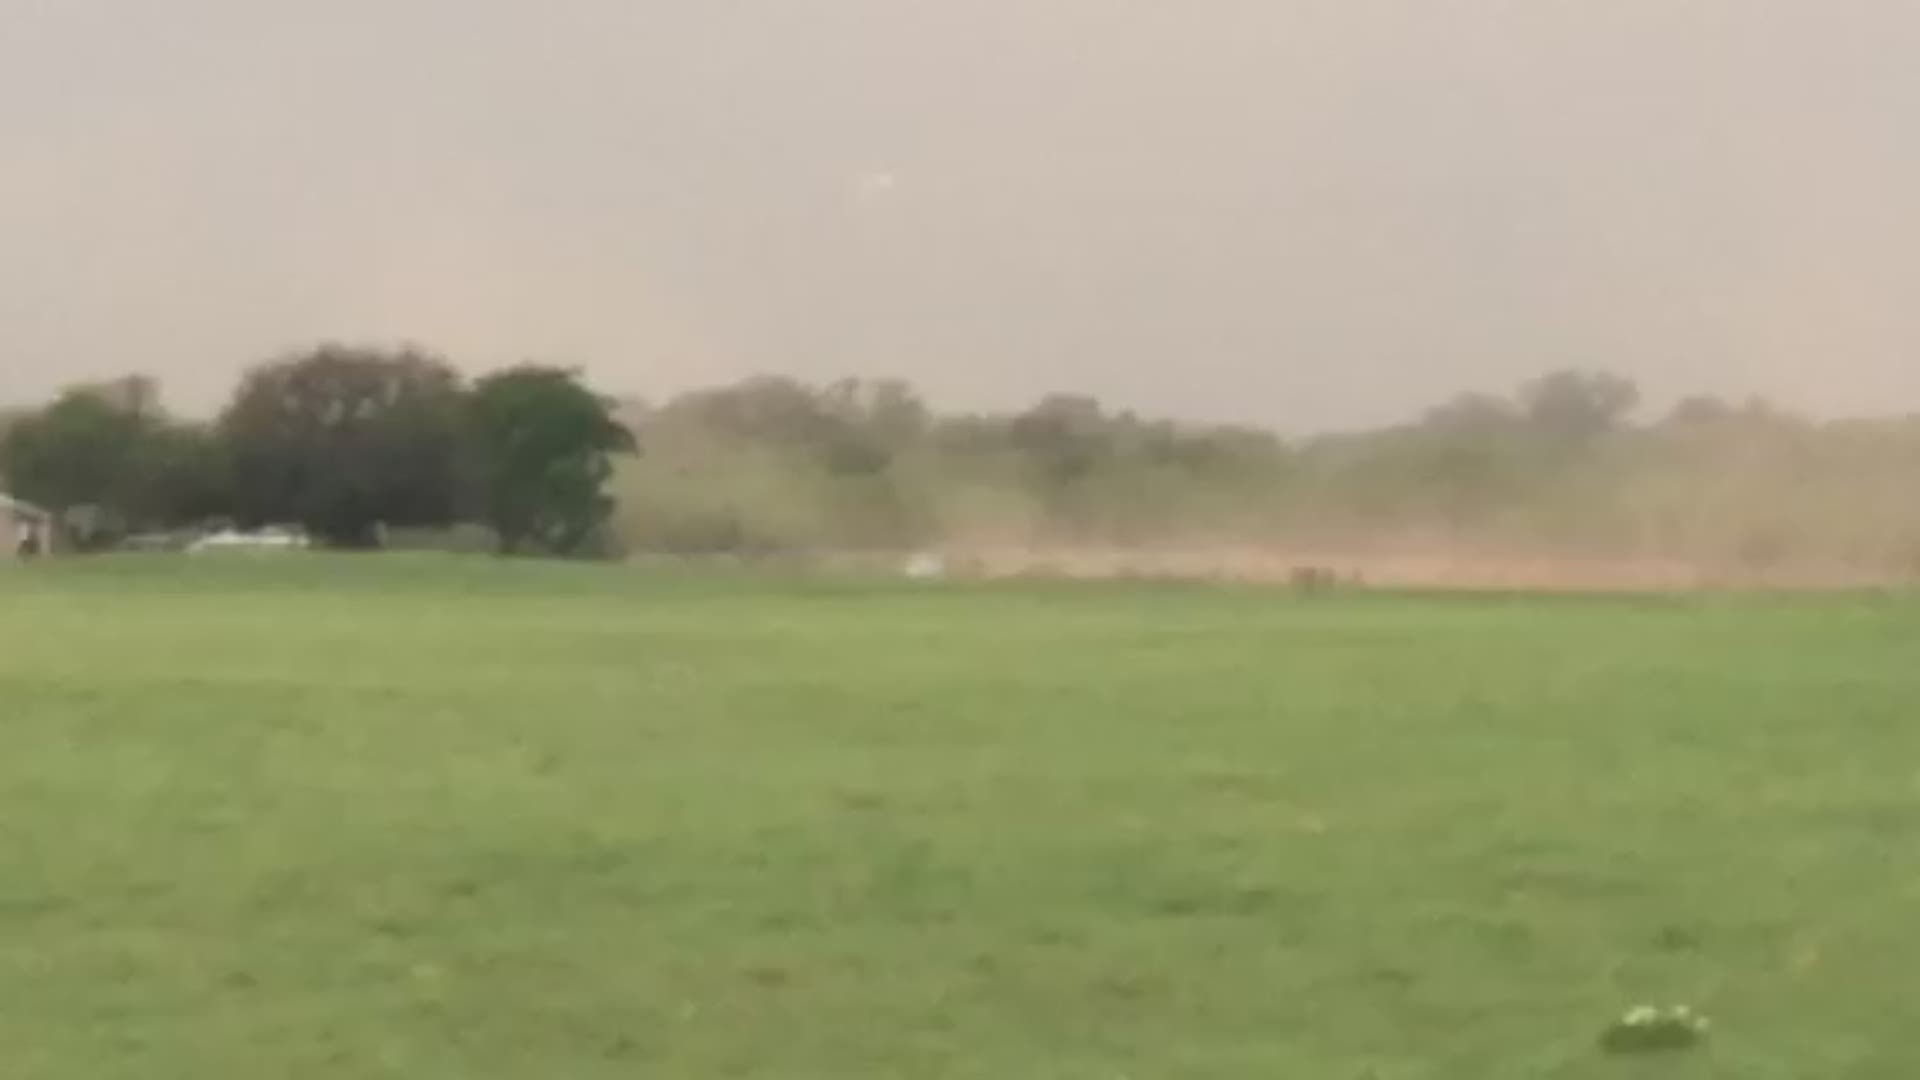 KENS 5 Eyewitness Rock Rayl captured video apparently showing gas vapors leaking about a quarter-mile from an explosion caused by a lightning strike.